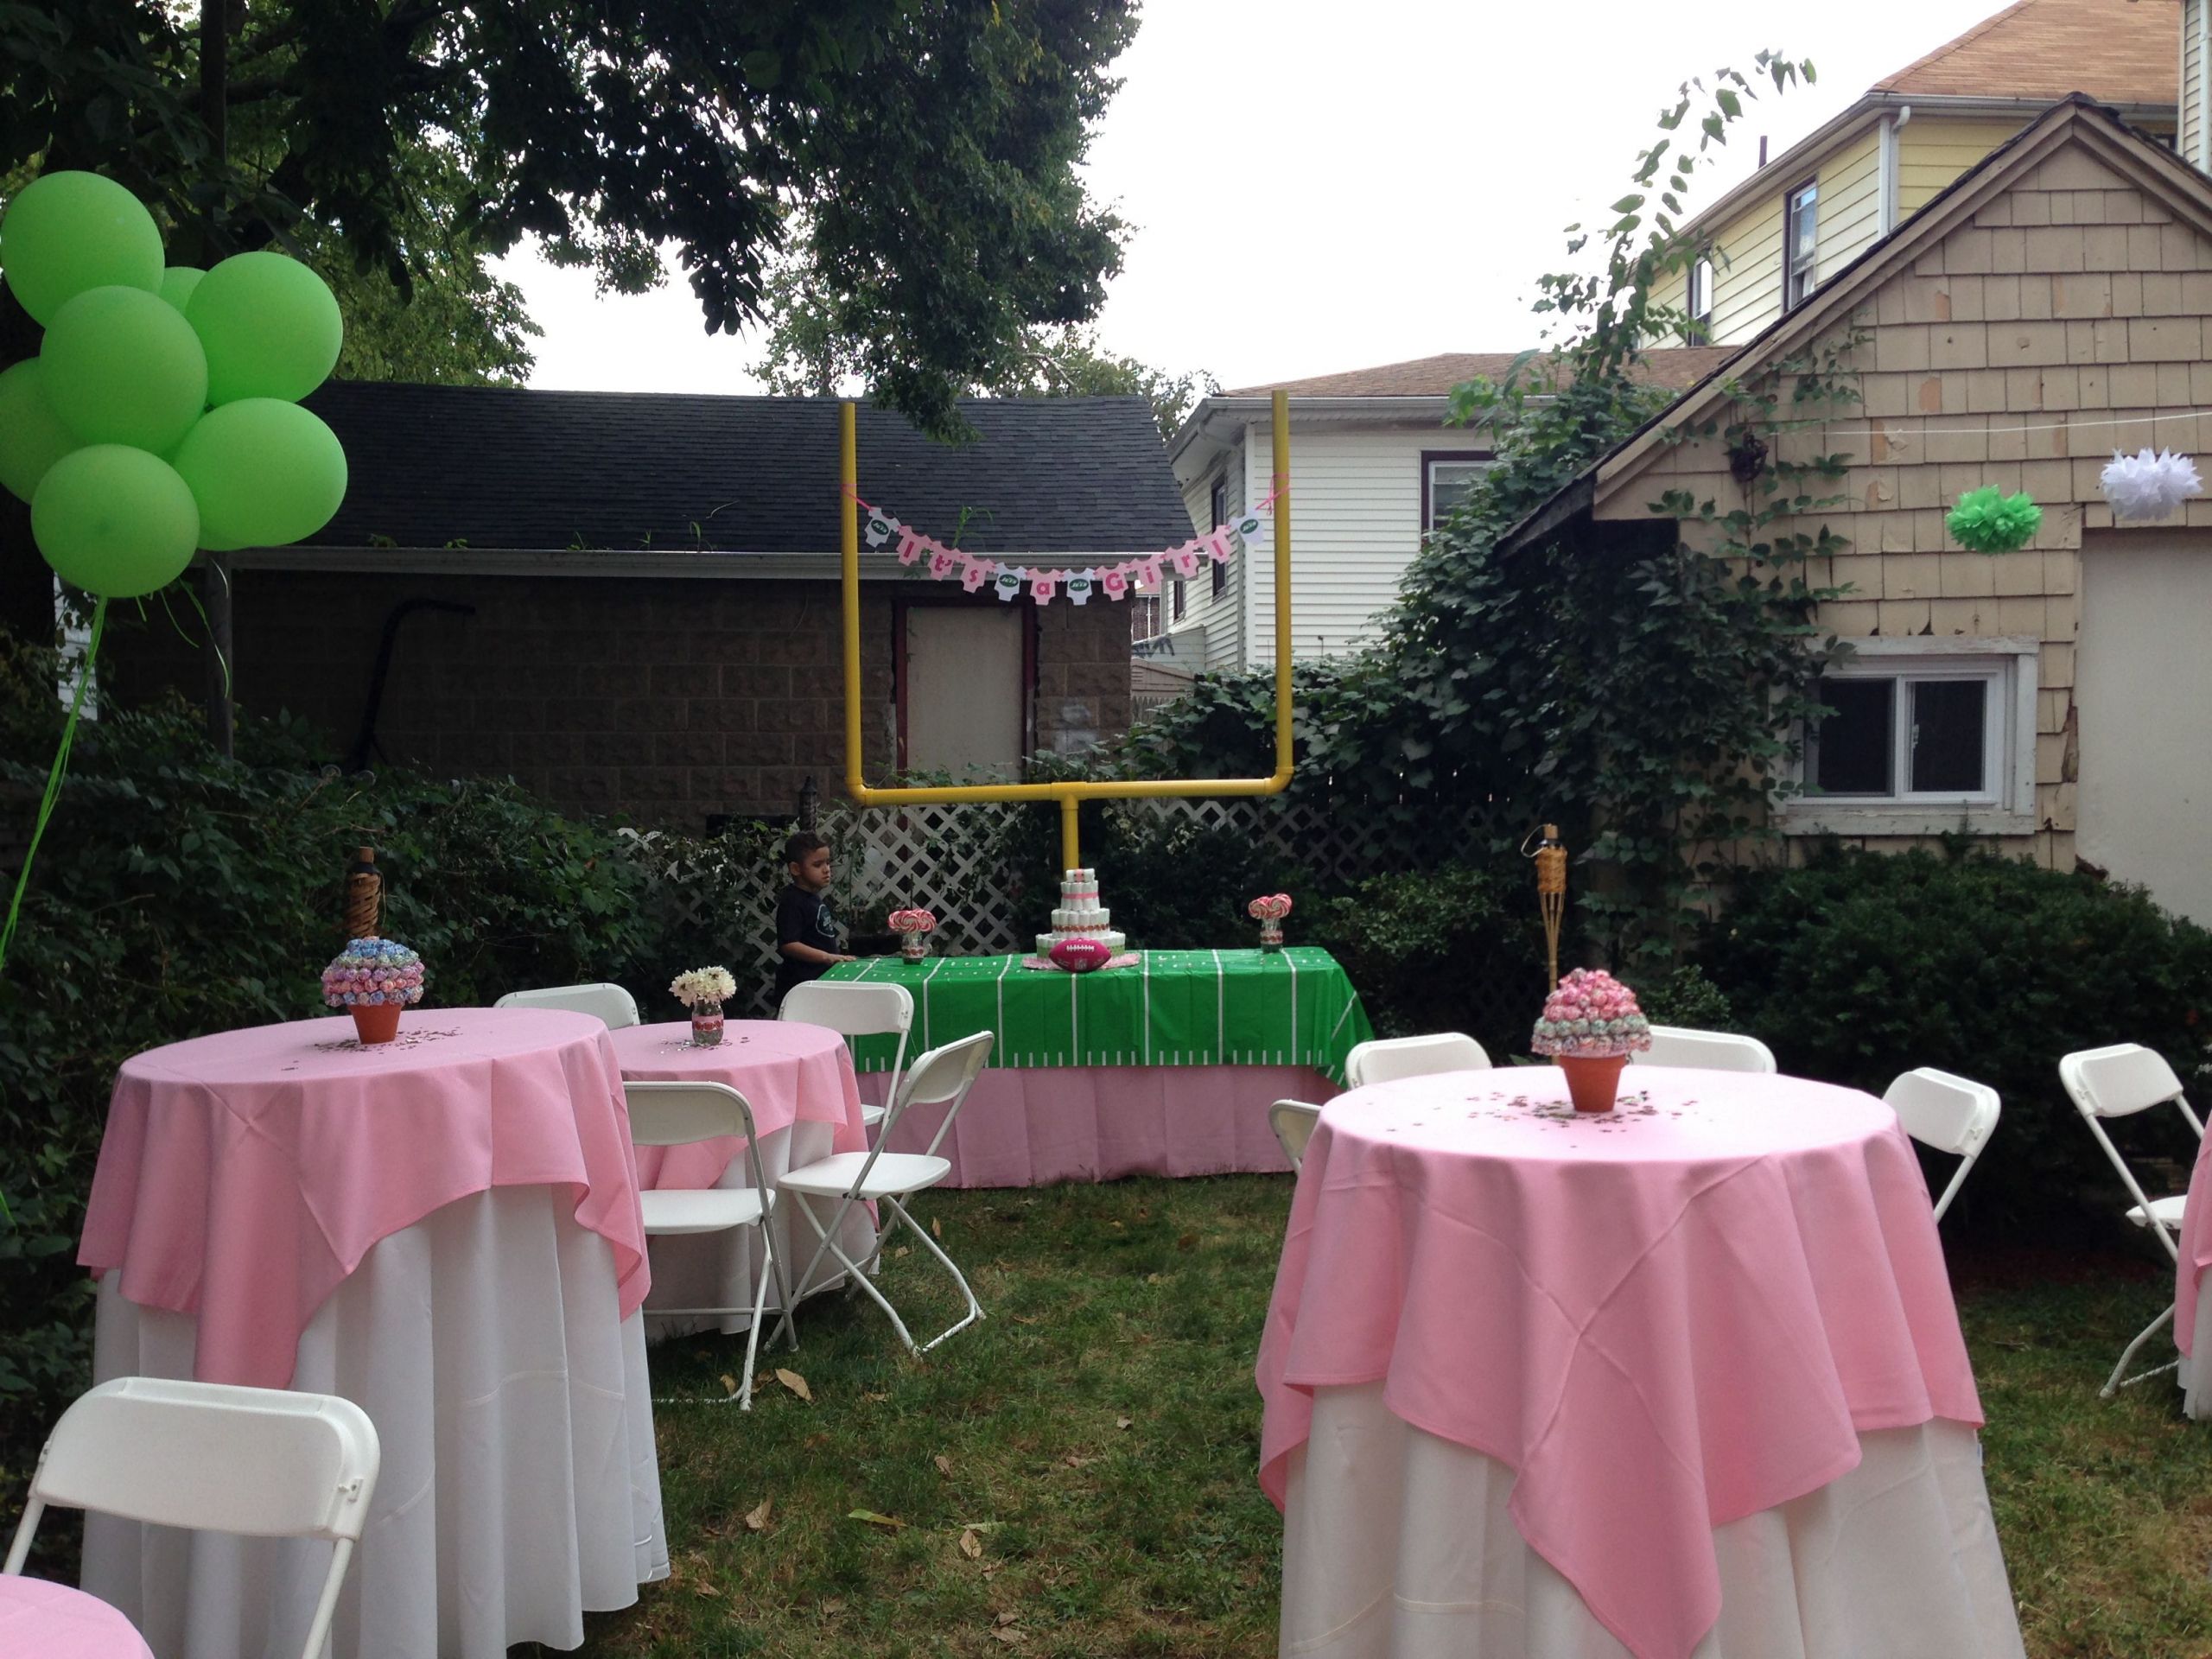 Football Themed Gender Reveal Party Ideas
 Football themed baby shower for a girl